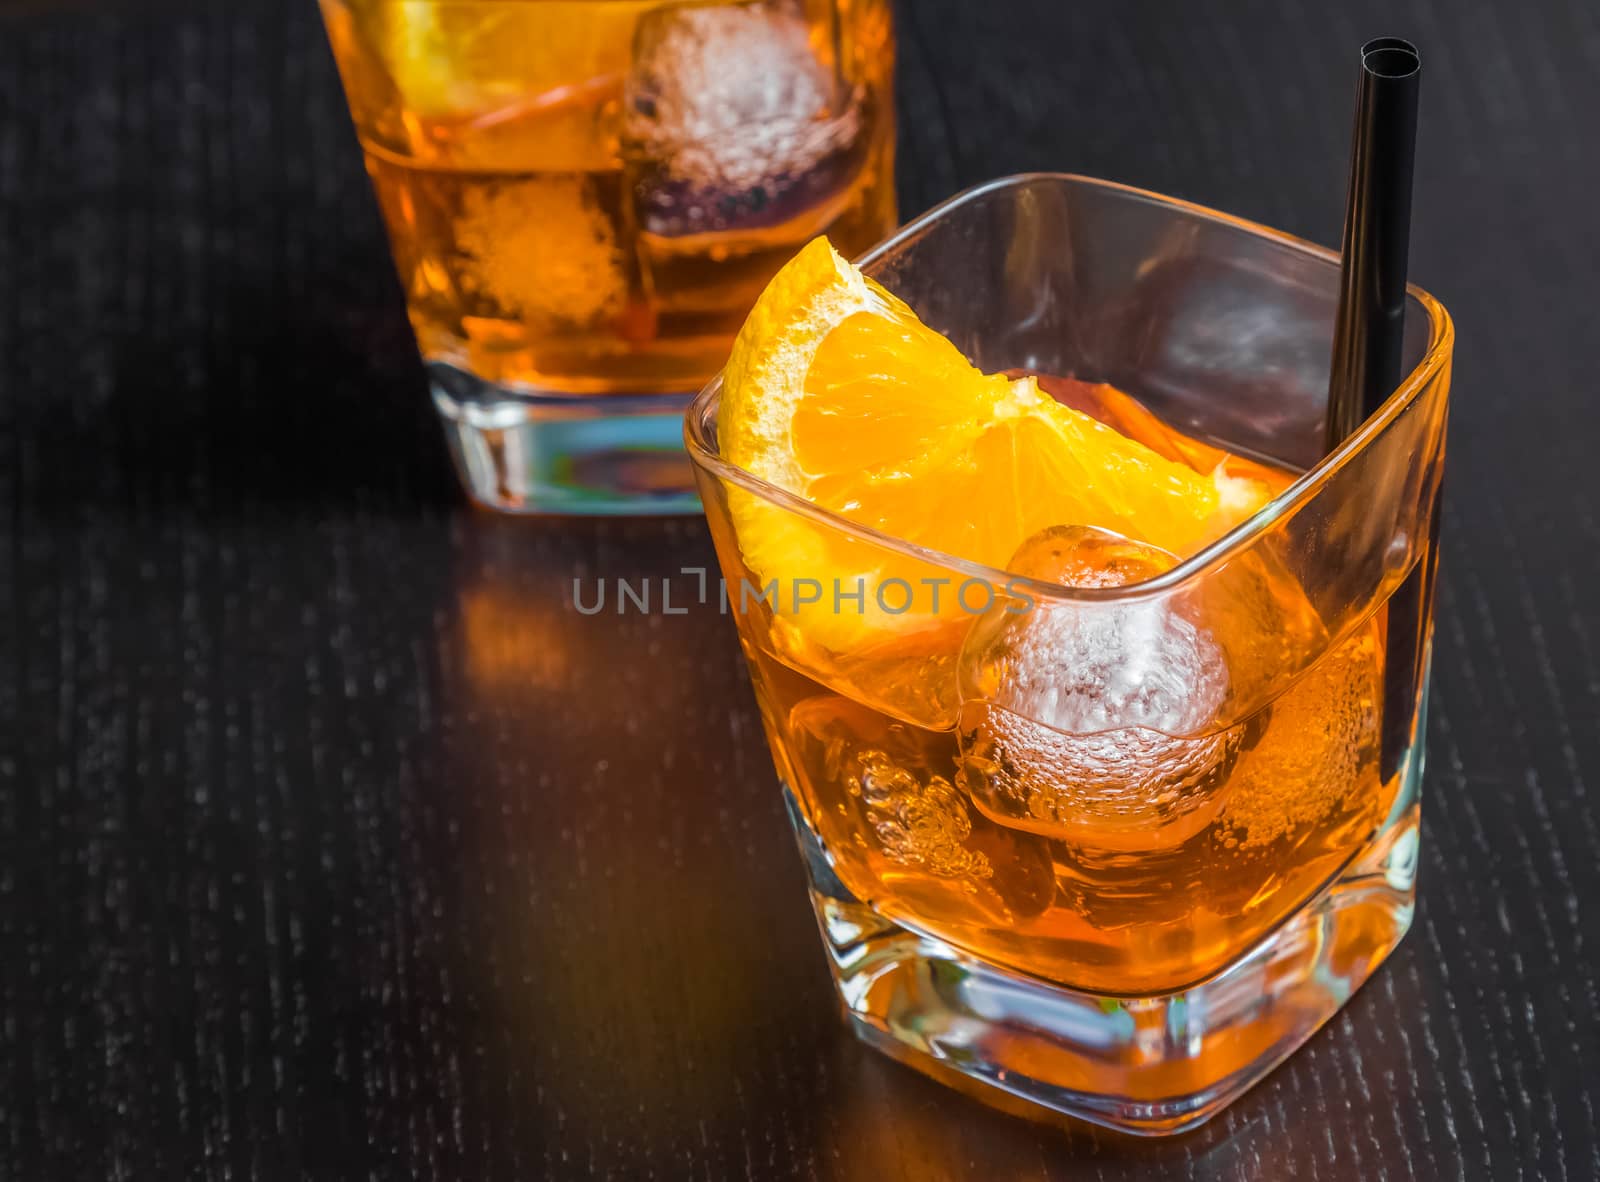 two glasses of spritz aperitif aperol cocktail with orange slices and ice cubes on wood table